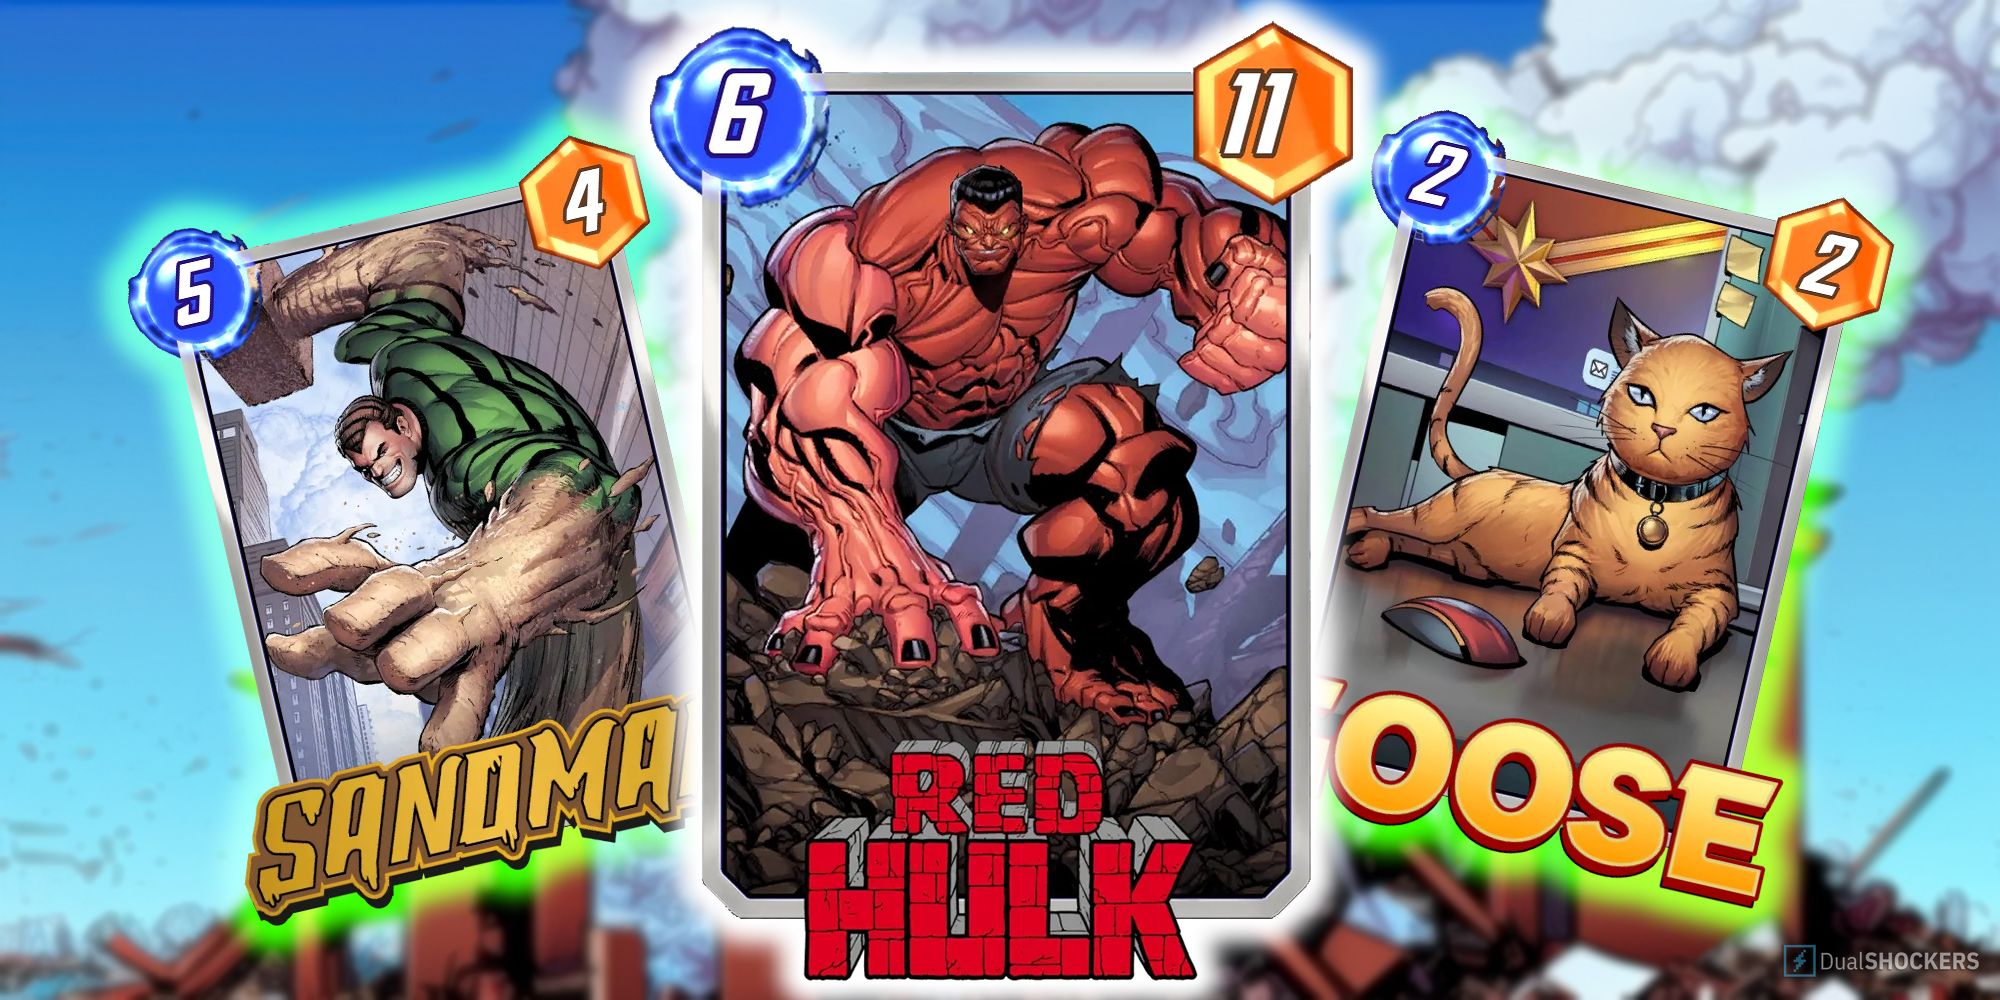 Marvel Snap's Red Hulk card surrounded by Sandman and Goose.